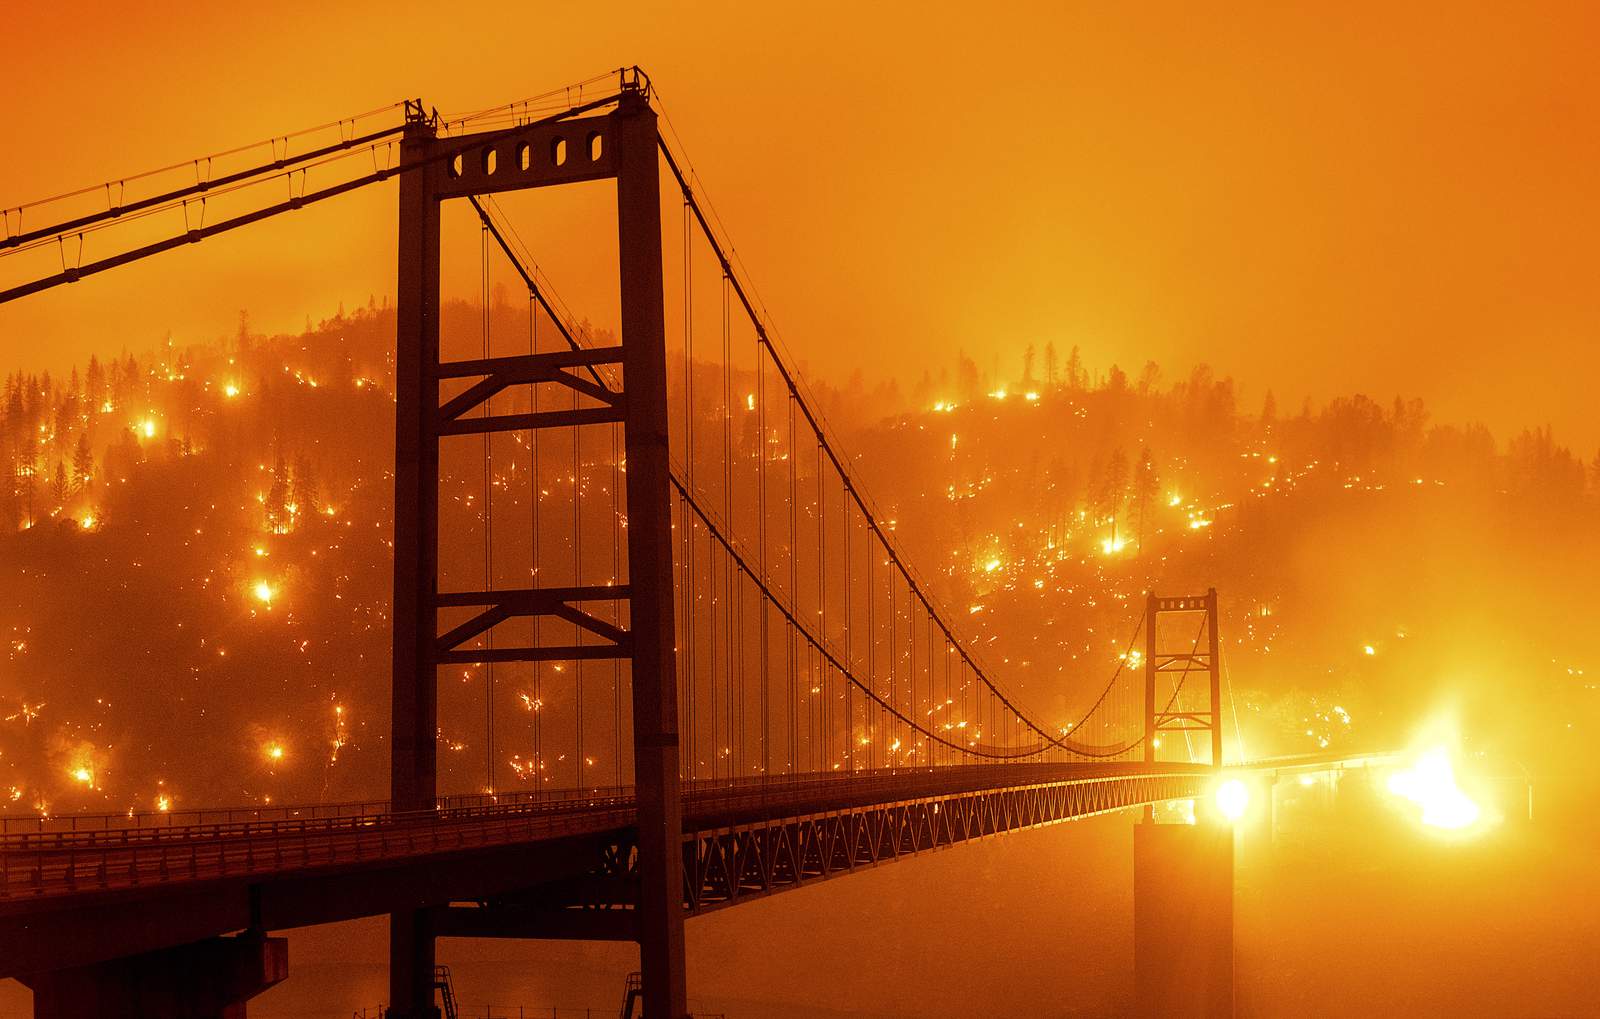 Explosive wildfires across California stoked by fierce winds